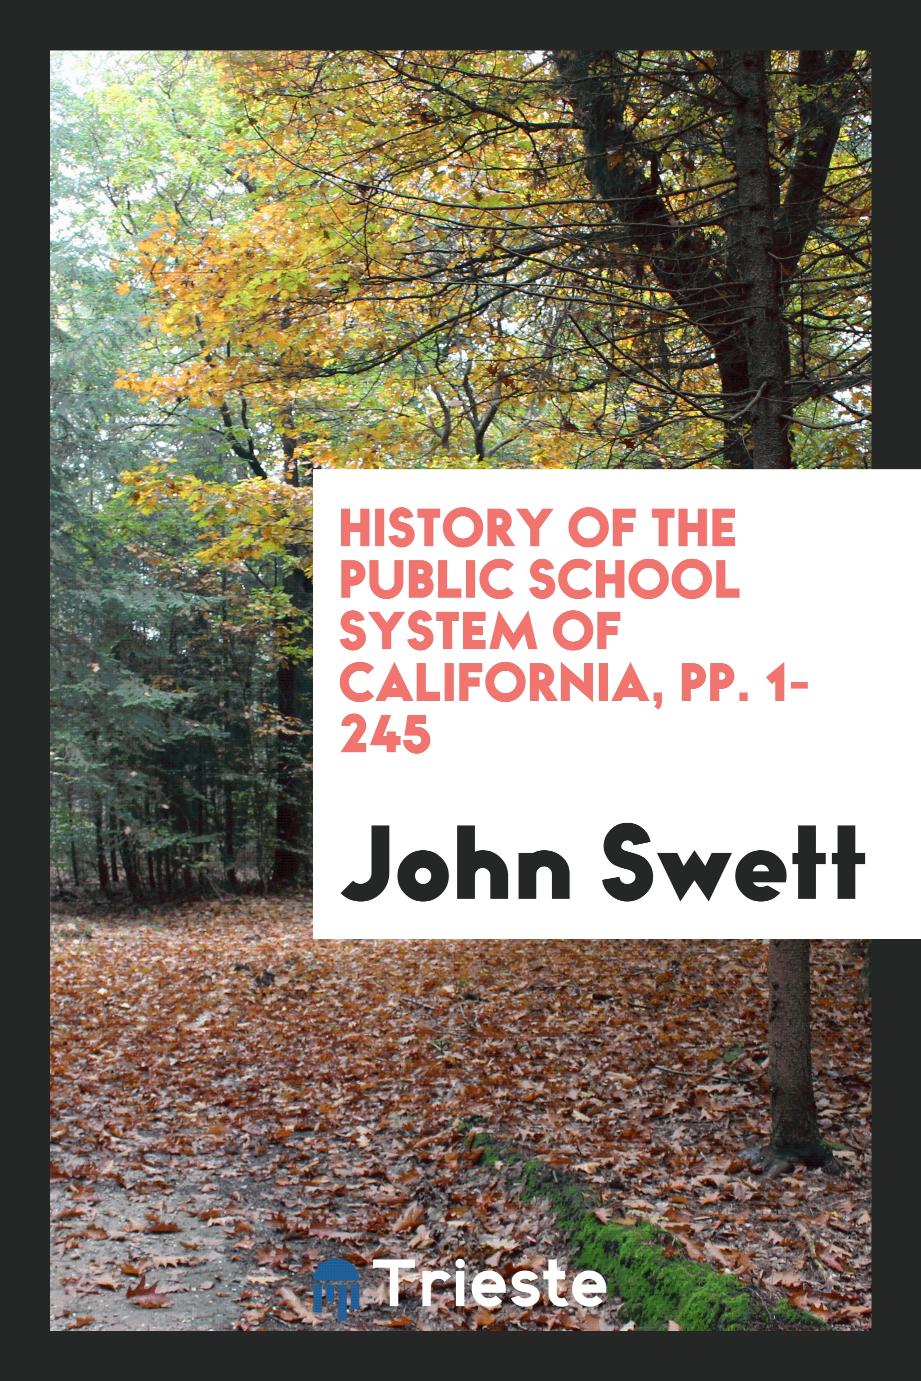 History of the Public School System of California, pp. 1-245